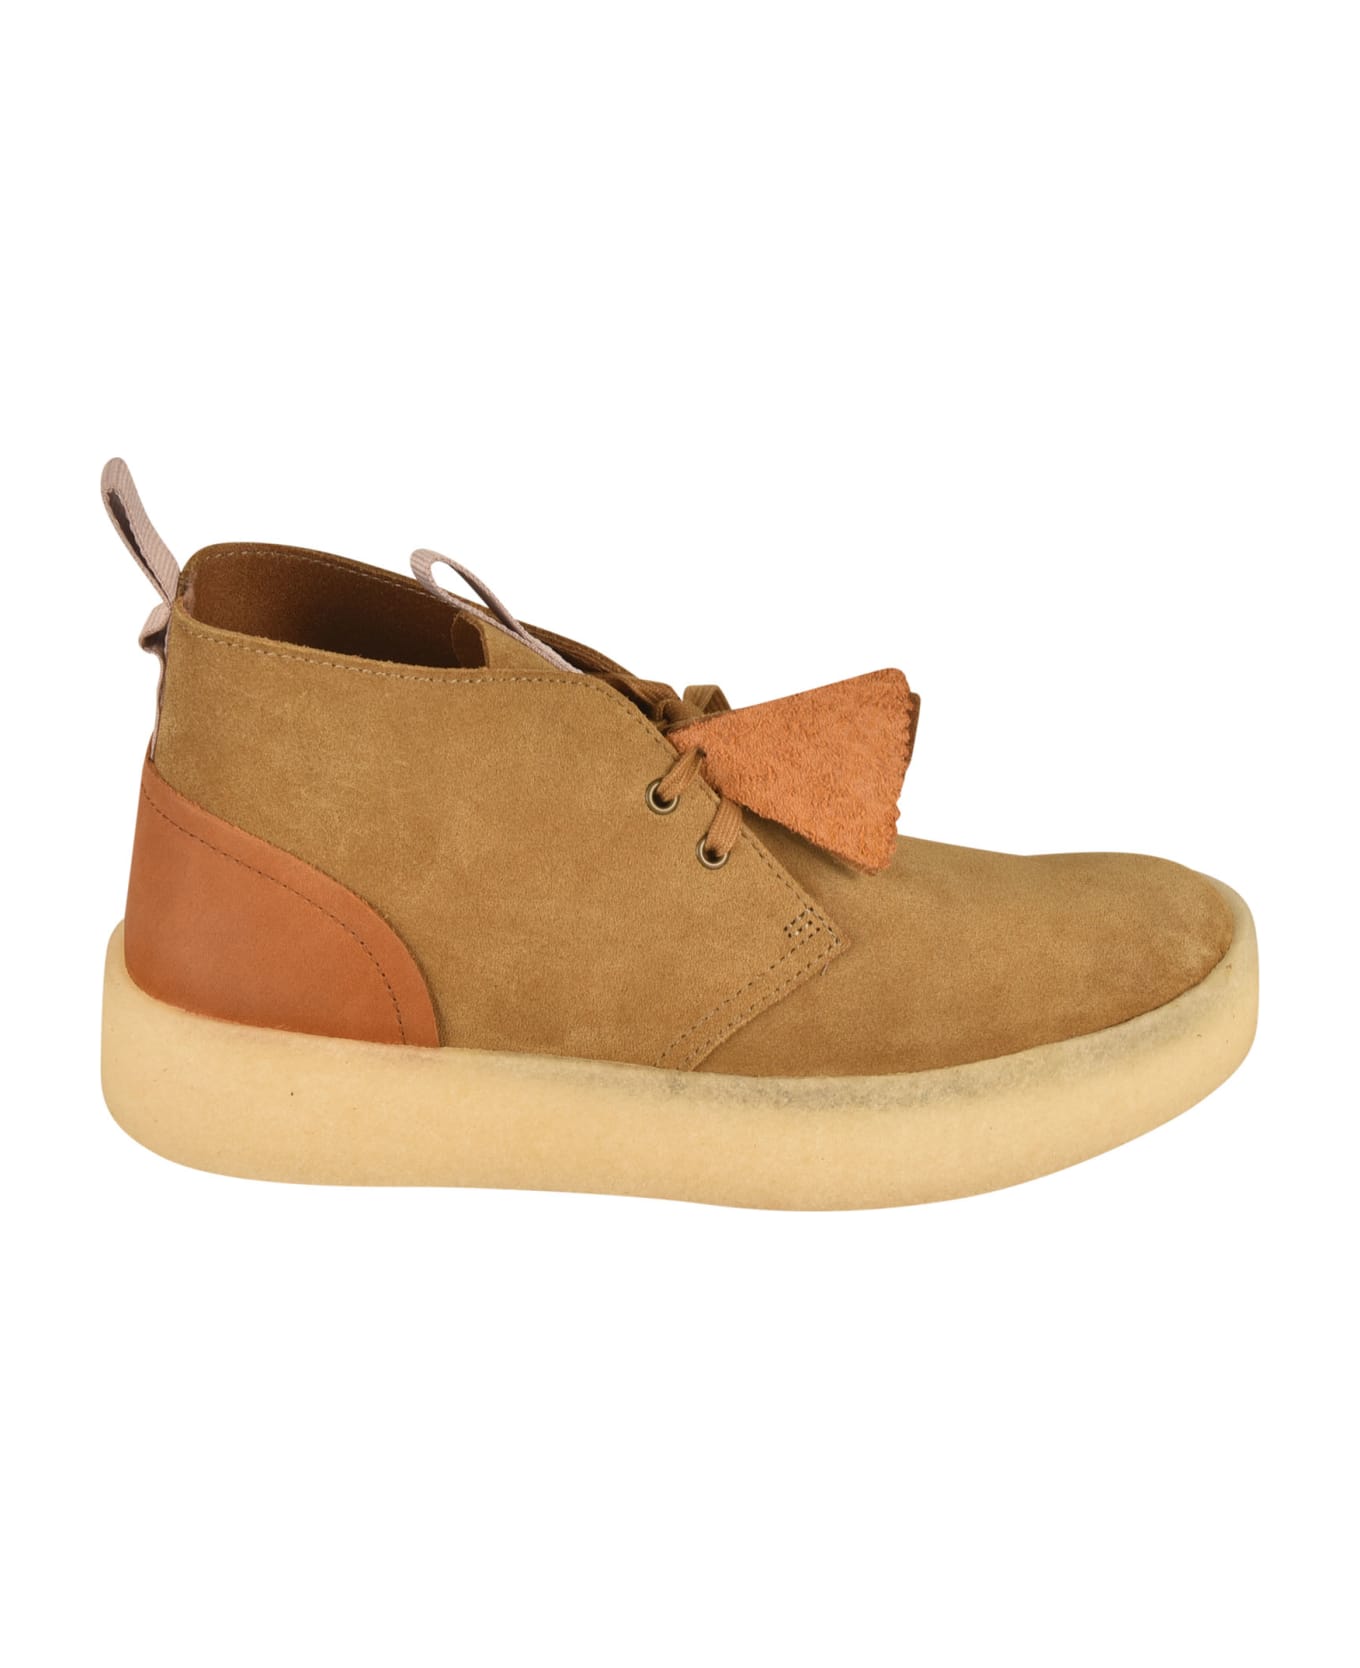 Clarks Desert Cup Ankle Boots - Quercia